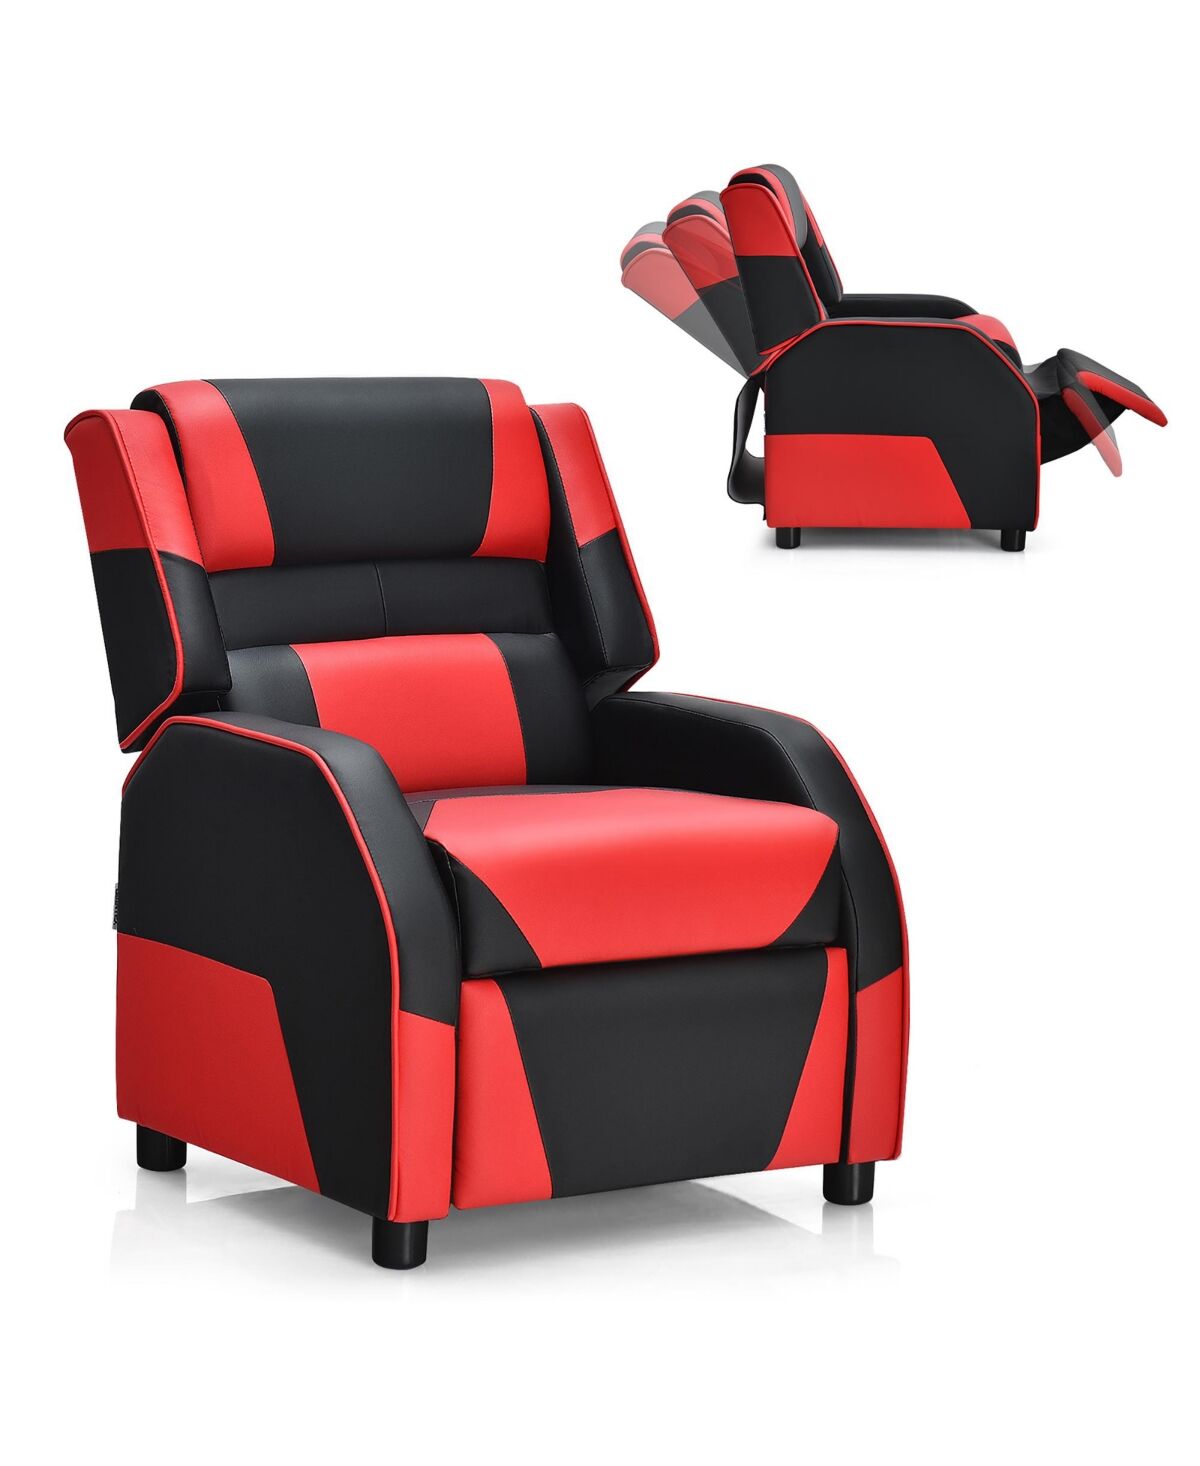 Costway Kids Youth Gaming Sofa Recliner w/Headrest & Footrest - Red